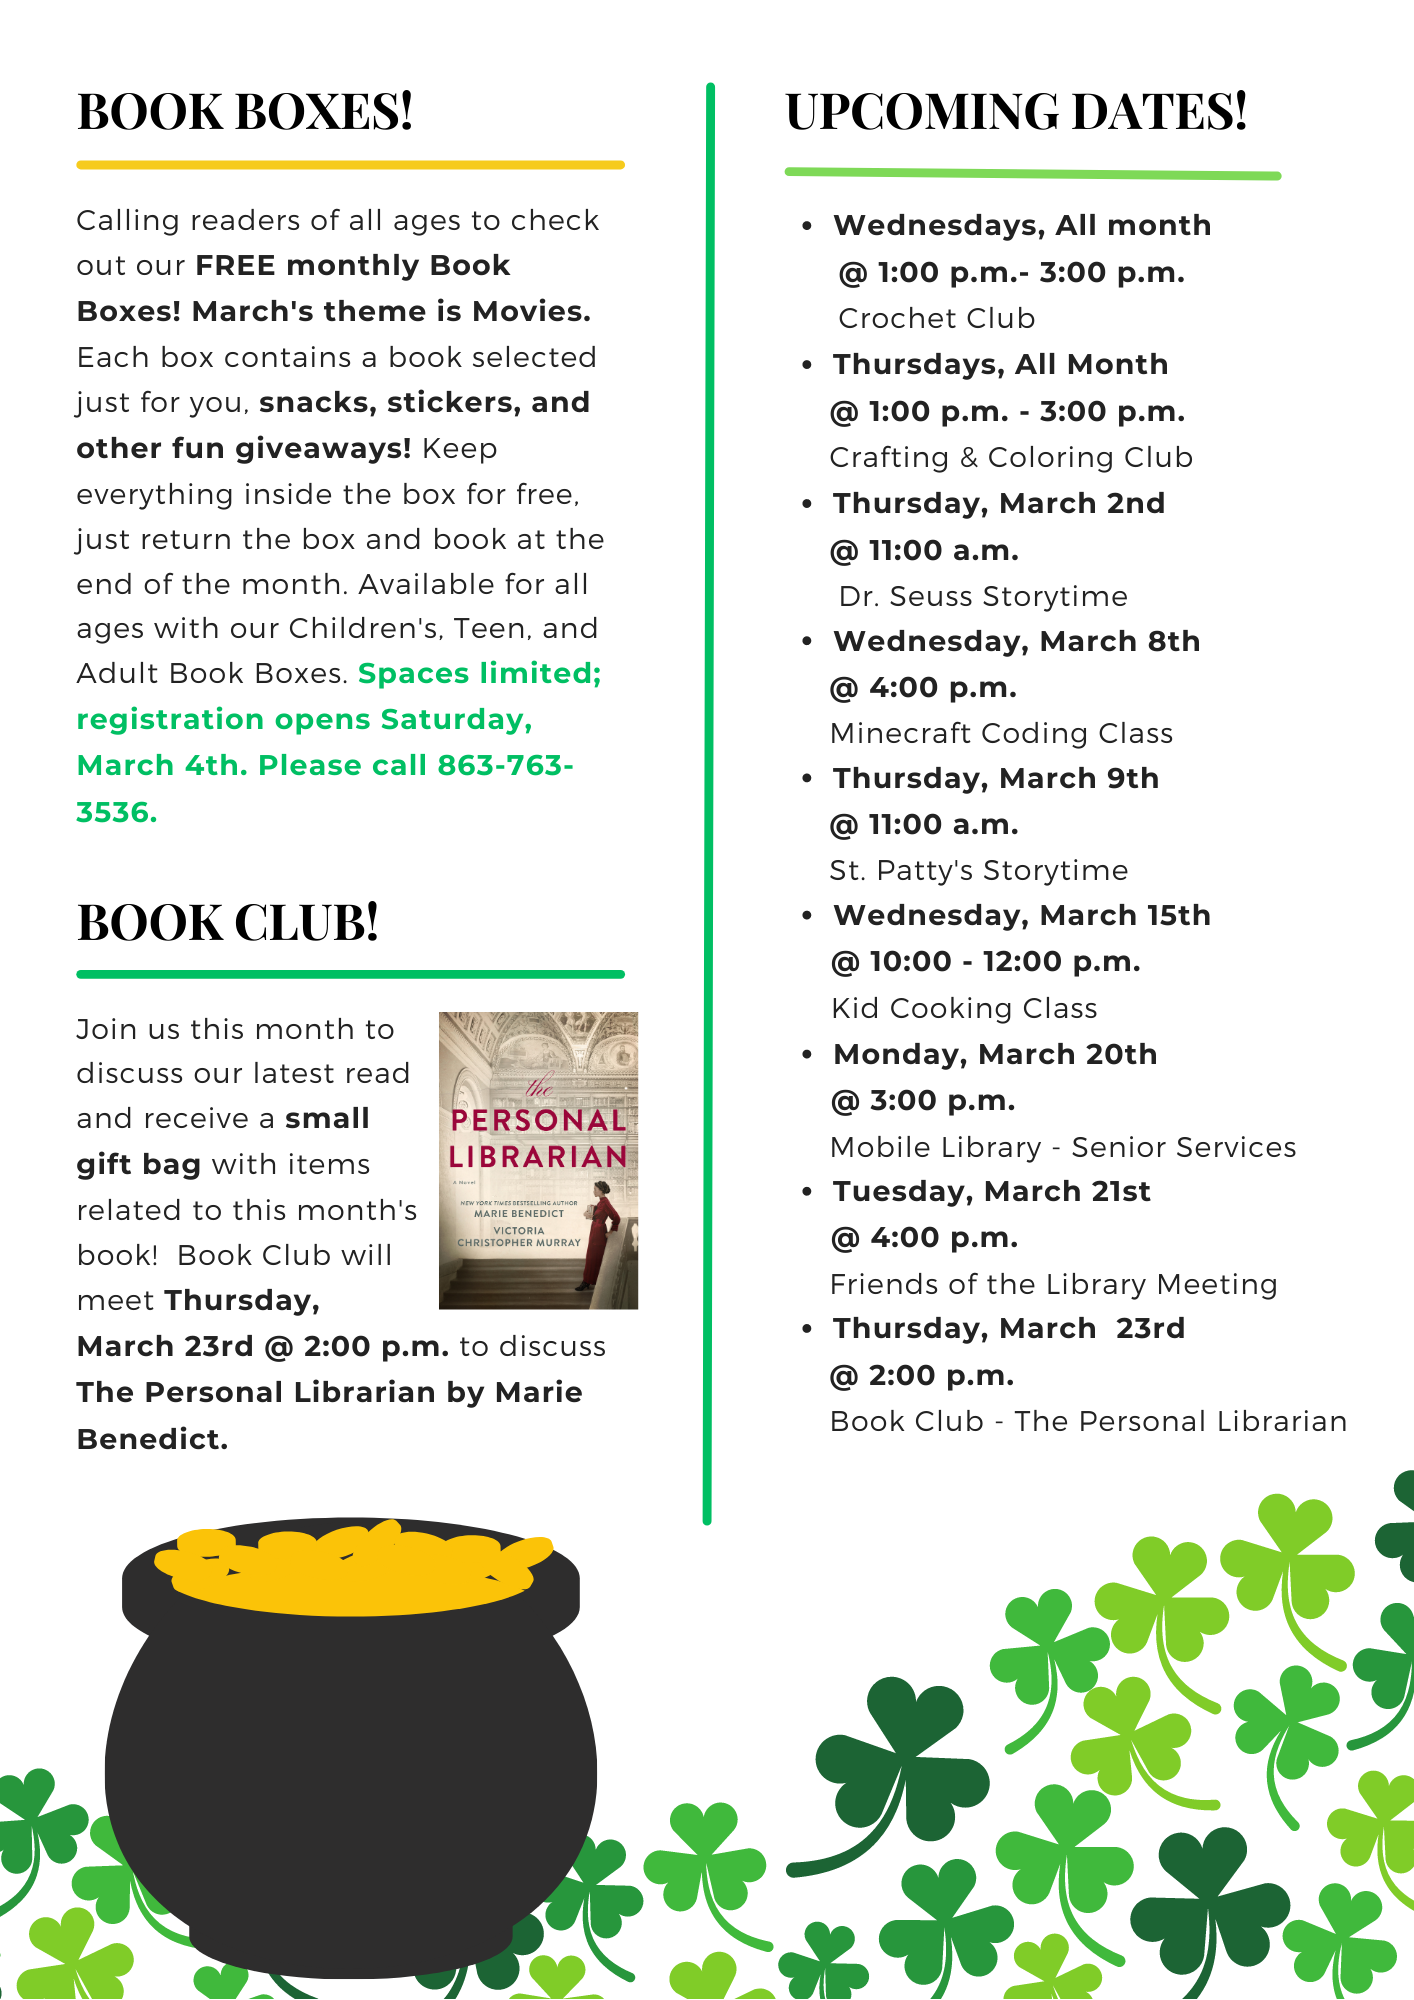 Check out the Okeechobee County Library's March newsletter for more information on our upcoming programs and services, staff favorites, monthly displays and collections, and how you can support the Library!